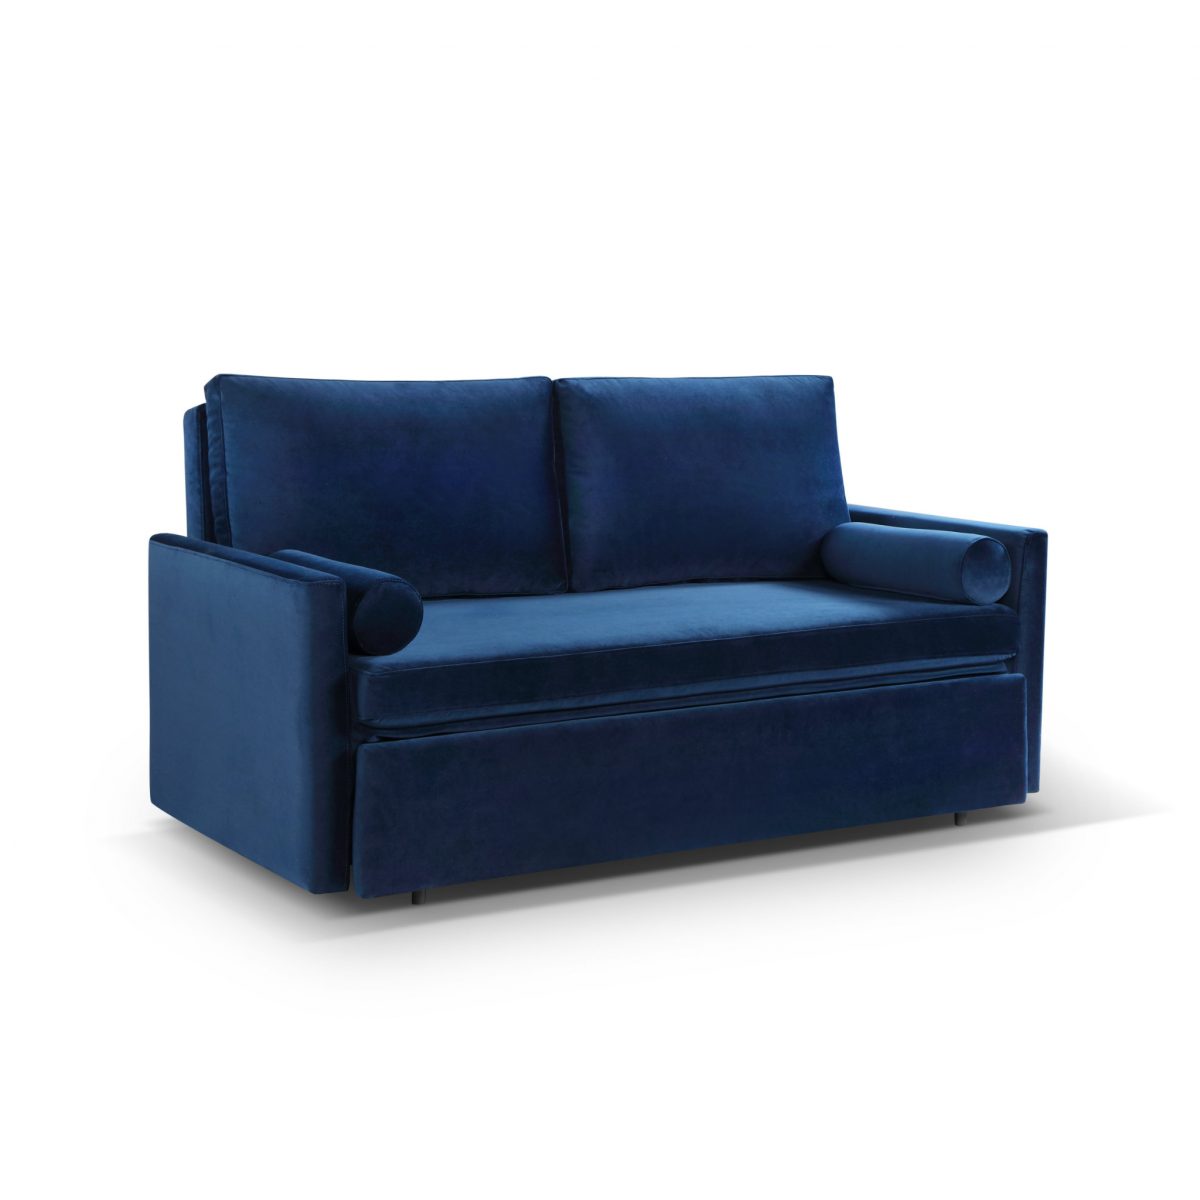 https://expandfurniture.com/wp-content/uploads/2020/11/Harmony-2-Queen-in-Navy-Blue-microfiber-Amazingly-compact-sofa-bed-with-memory-foam-sleep-feel-1200x1200-cropped.jpg